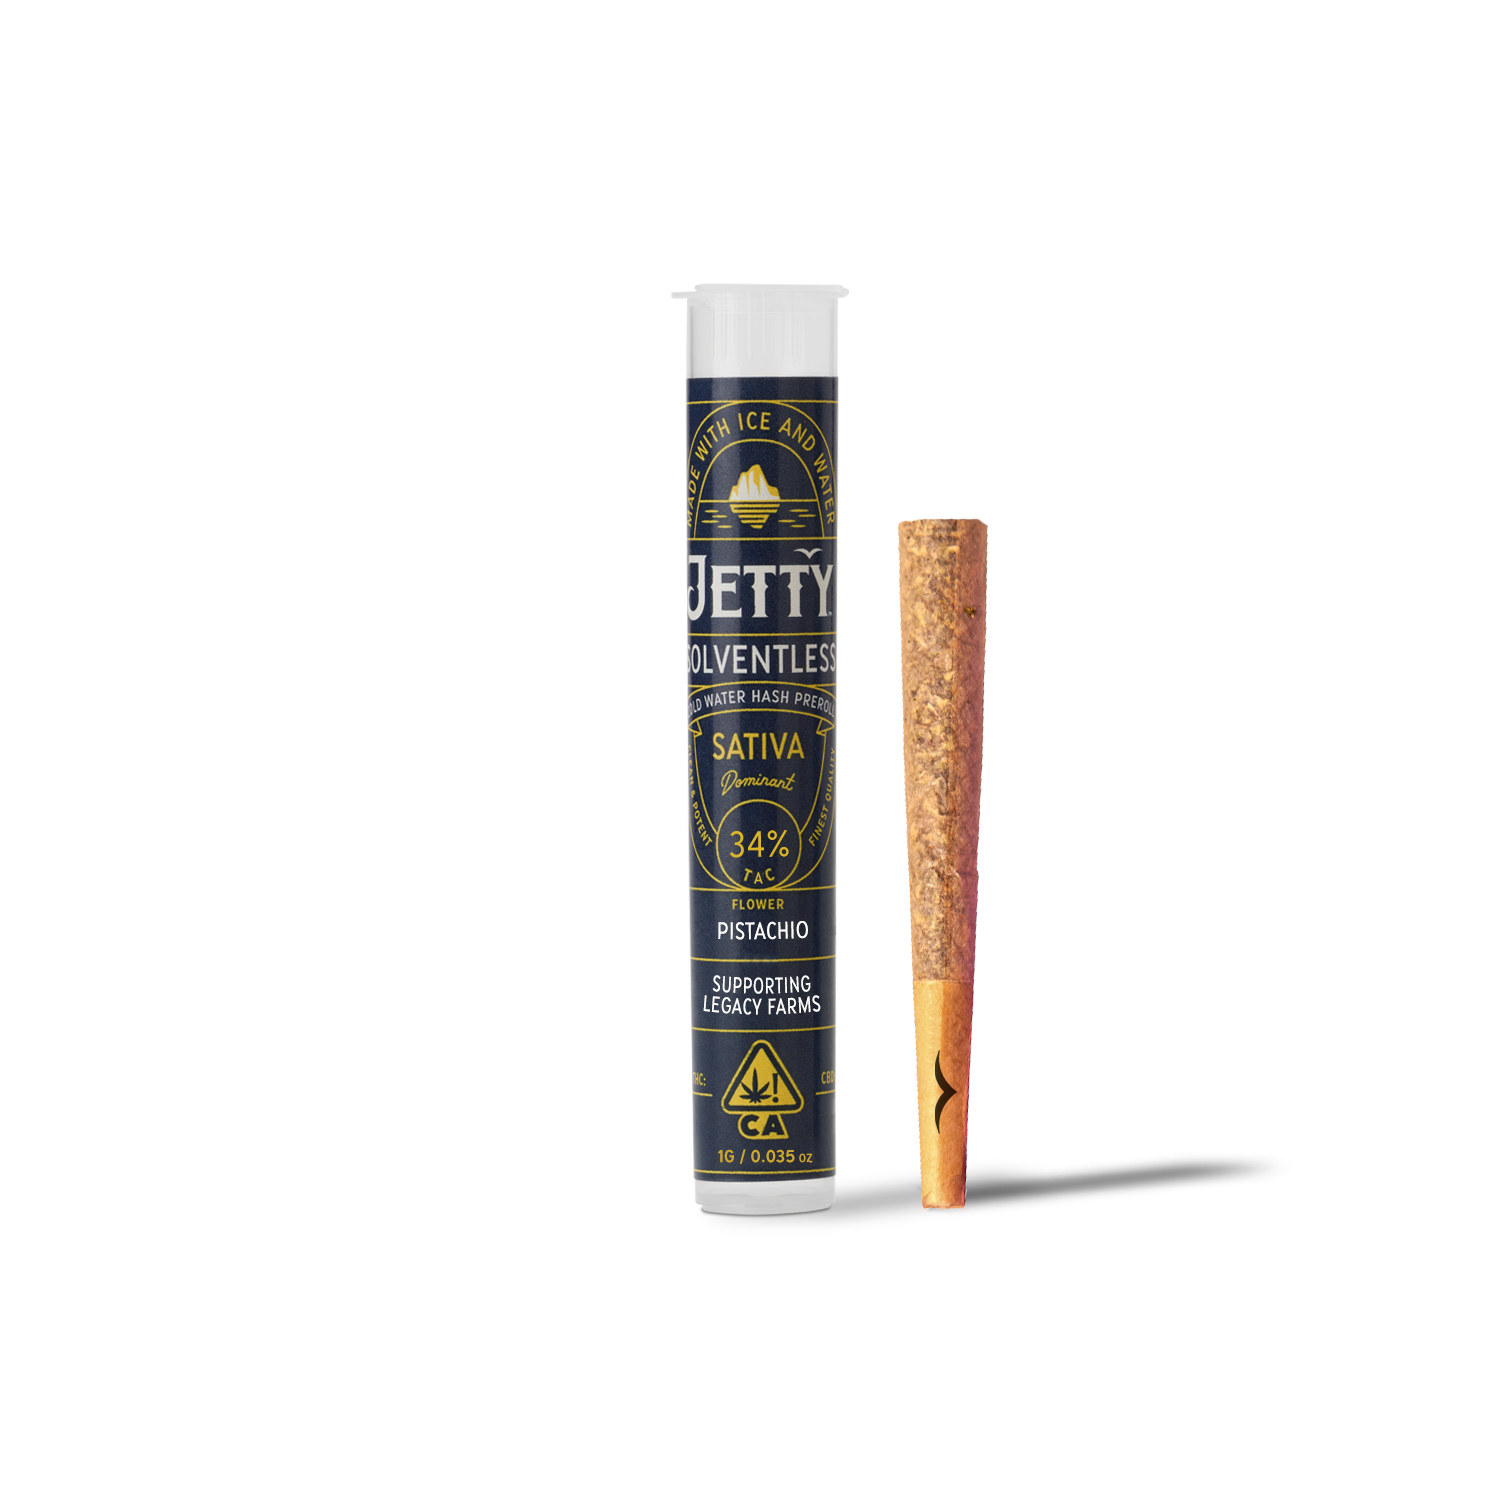 A photograph of Jetty 1g Solventless Preroll Pistachio